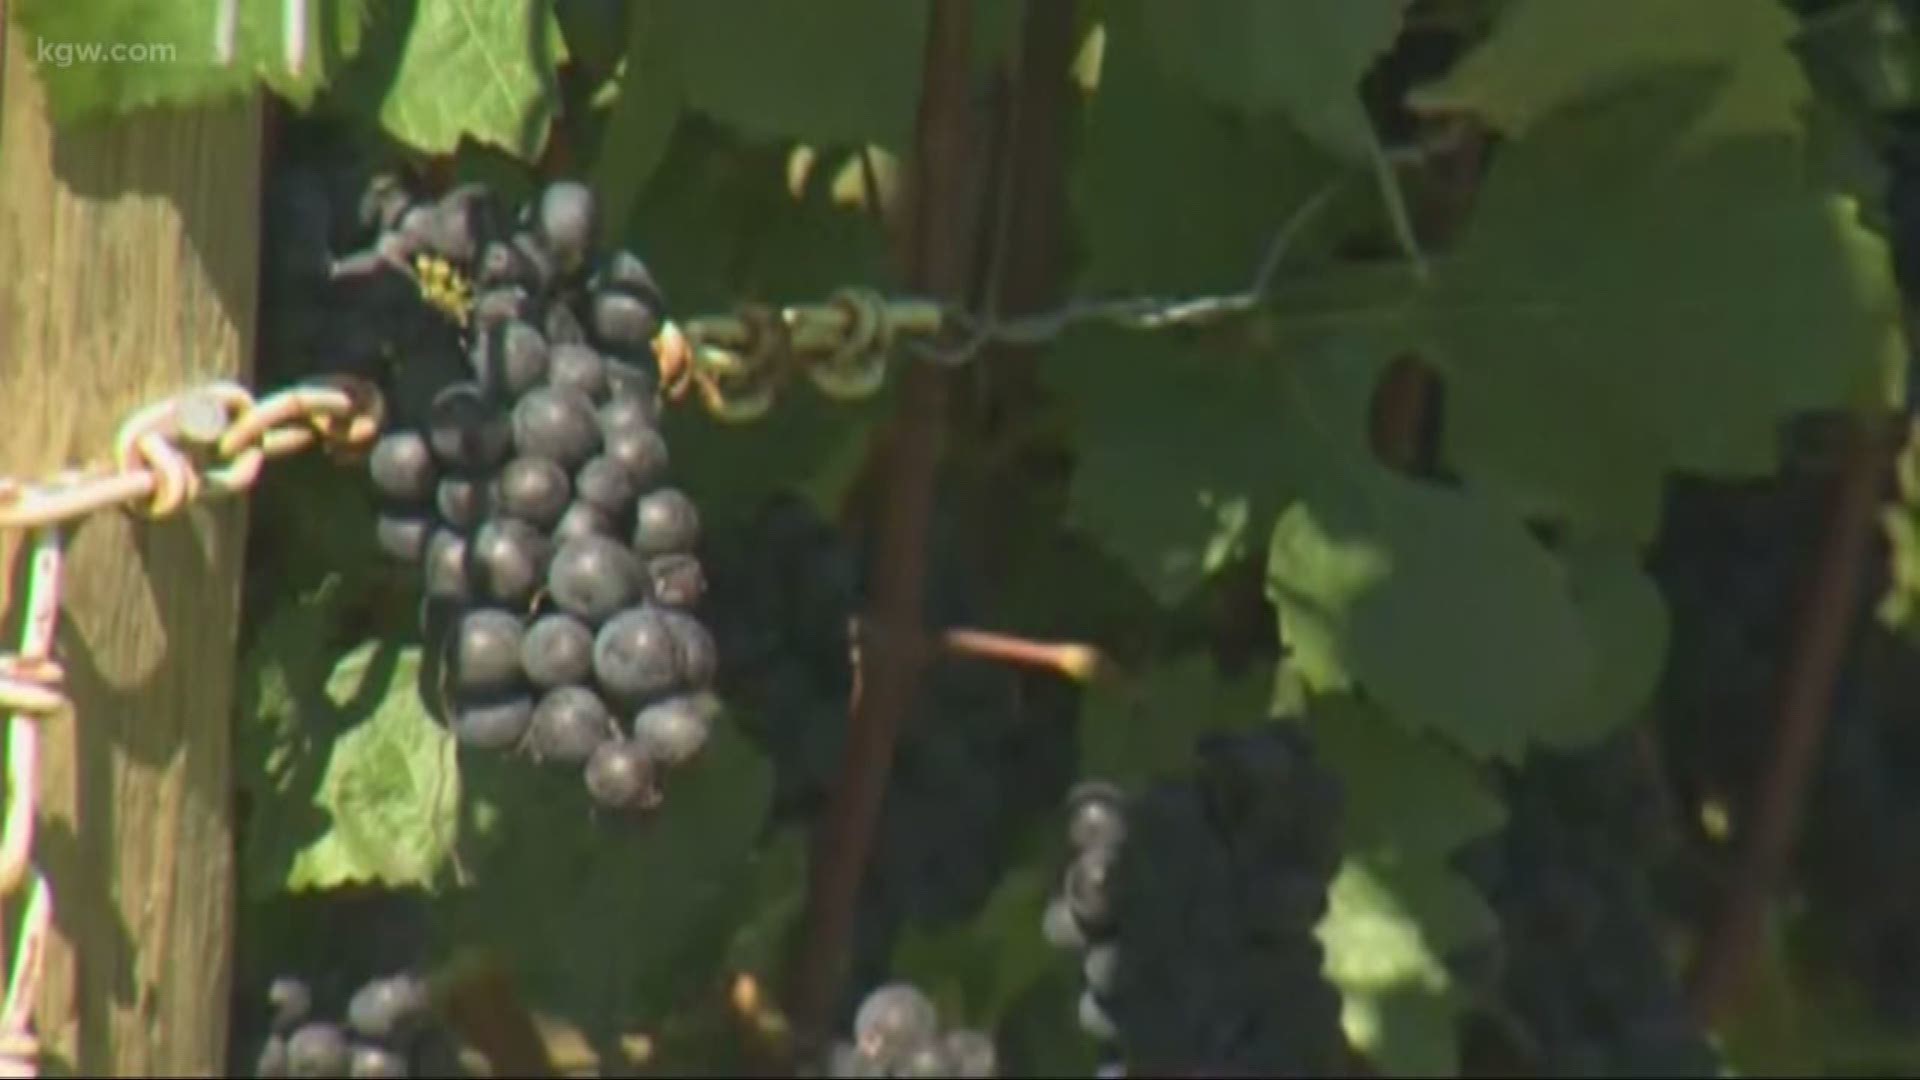 The rain and early cold temperatures in Oregon have made for difficult conditions for pinot harvest. Some winemakers have already taken their grapes off the vine.